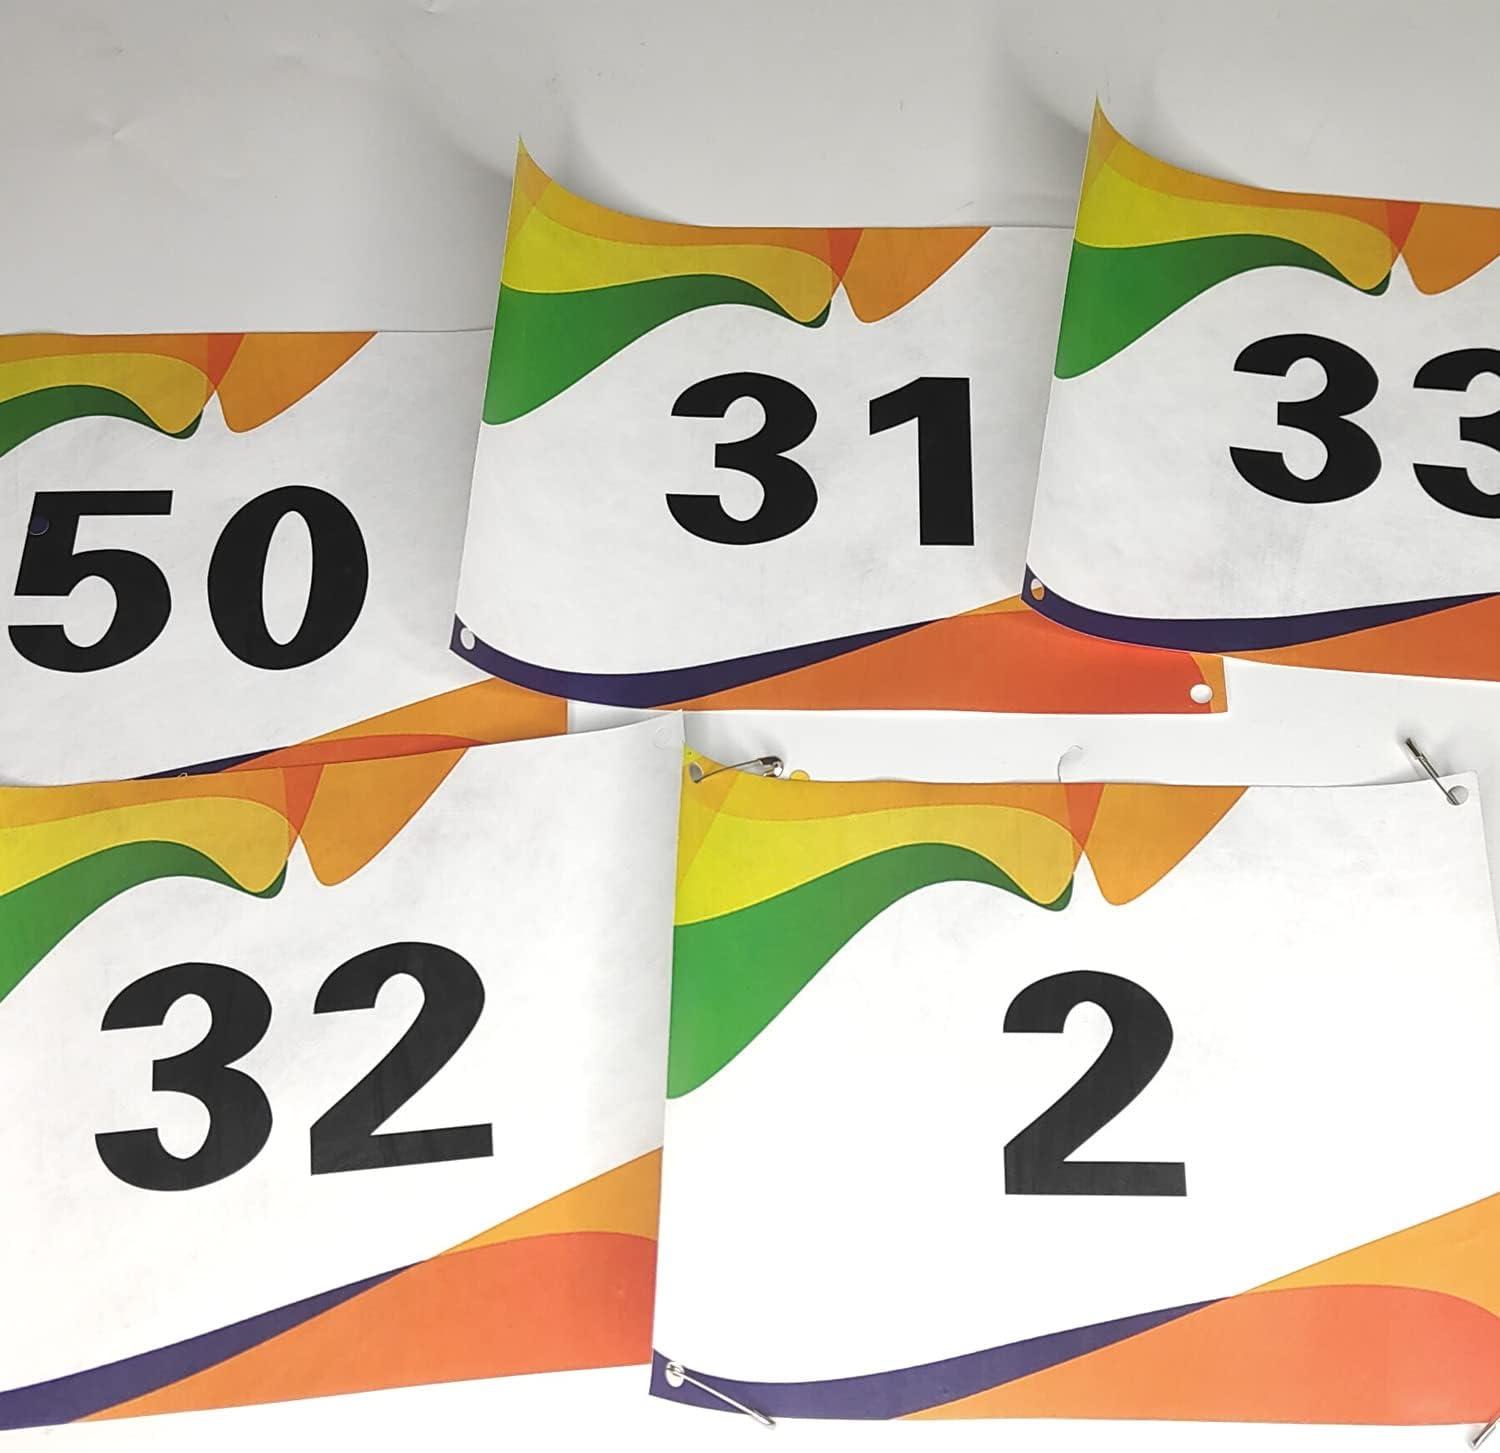 Running Bib Numbers with Safety Pins for Marathon Sports Competition Events  Tearproof Waterproof 6 x 7.5 Inch 100